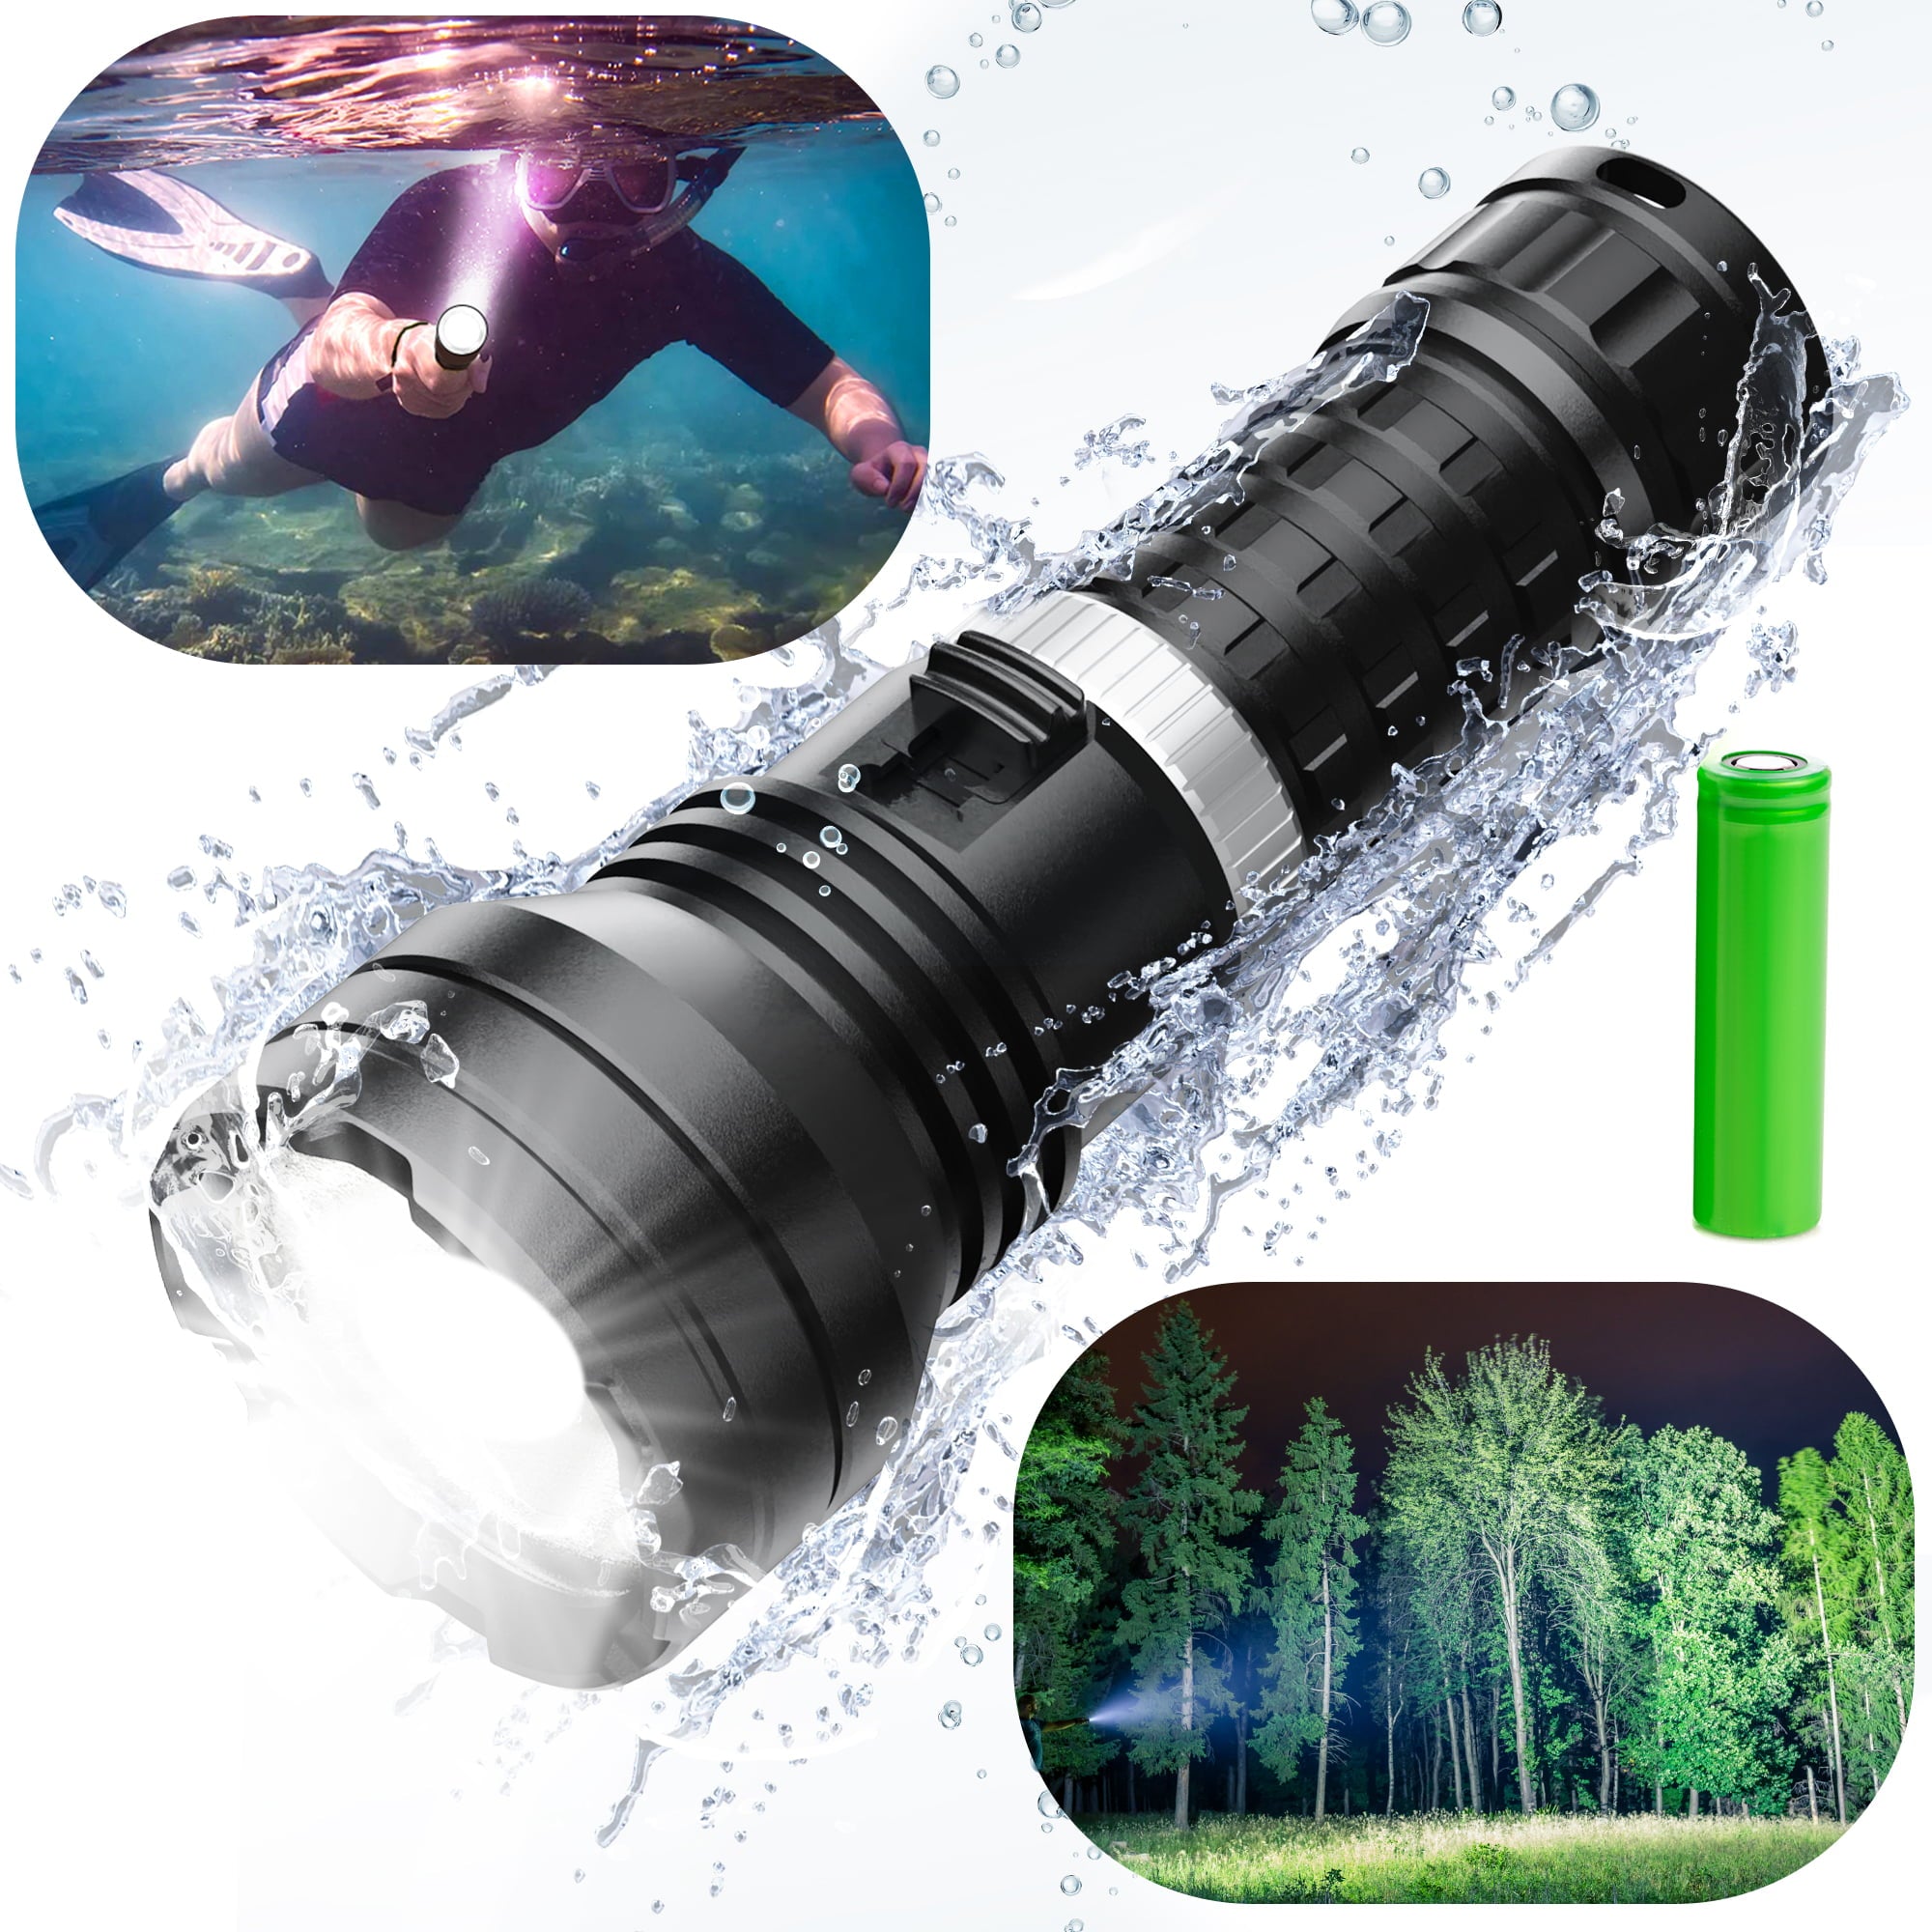 100000 Lumens Powerful Flashlight, Rechargeable LED Diving Flashlight, IPX8 Underwater Scuba Light, Super Bright Flash Light for Hiking Hunting Camping Outdoor Emergencies